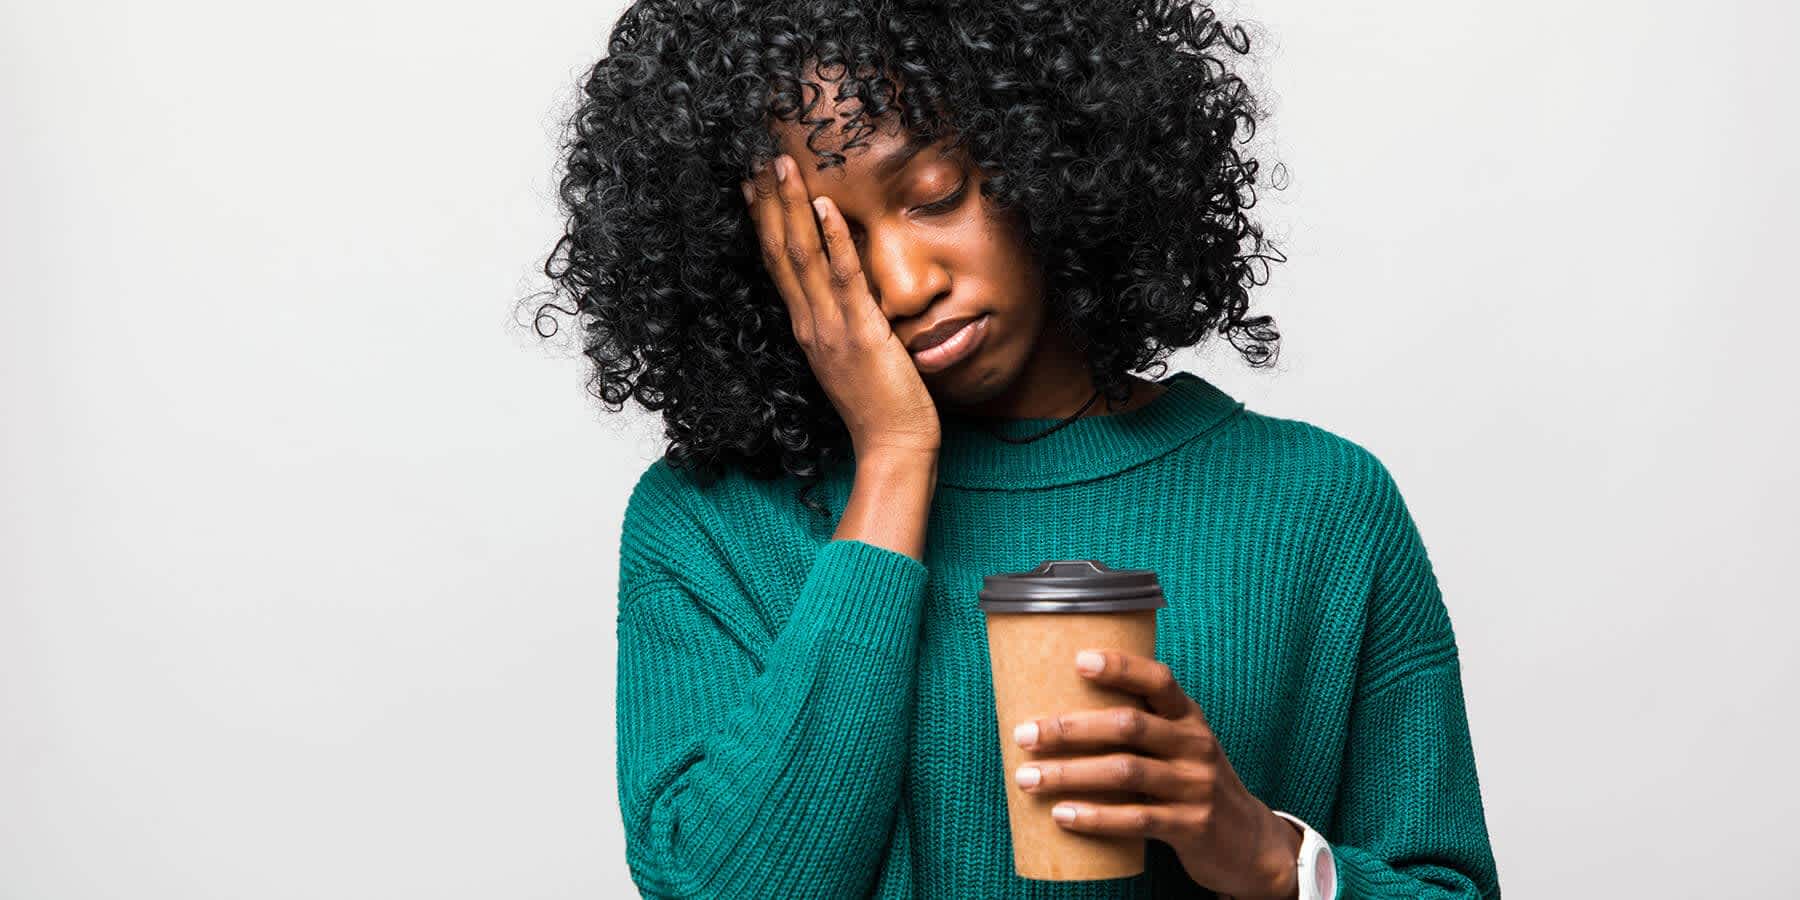 Tired woman with hand on face and holding coffee cup experiencing symptoms of hemochromatosis